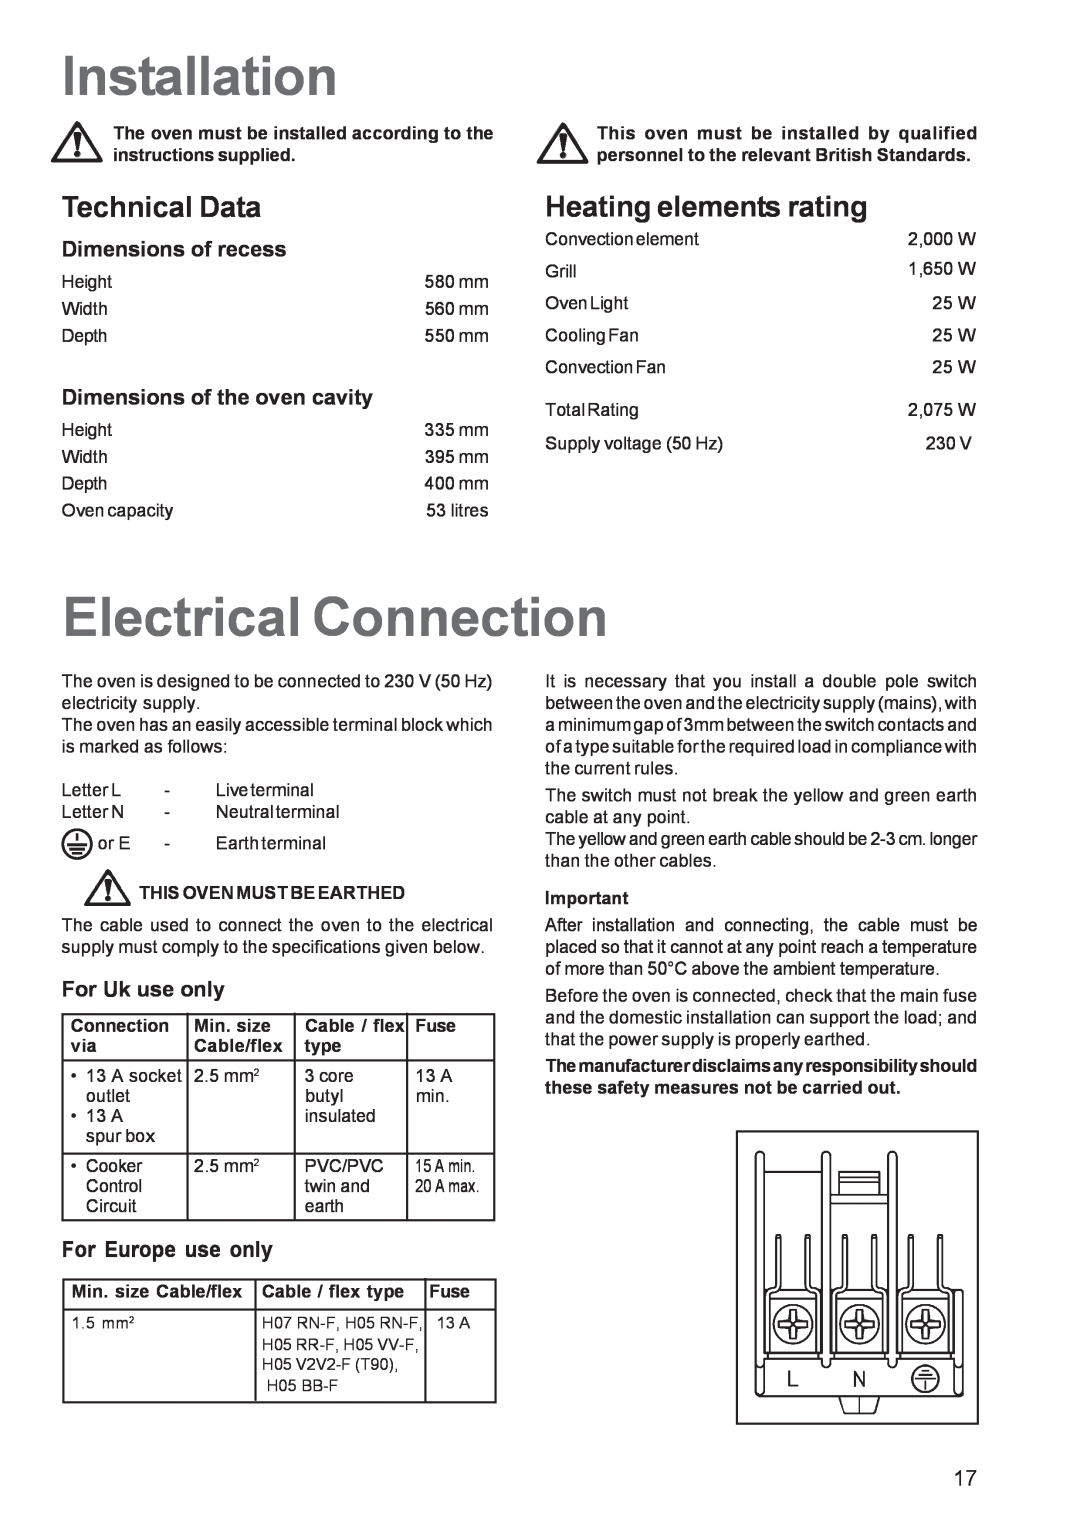 Tricity Bendix TBF 610 Installation, Electrical Connection, Technical Data, Heating elements rating, Dimensions of recess 